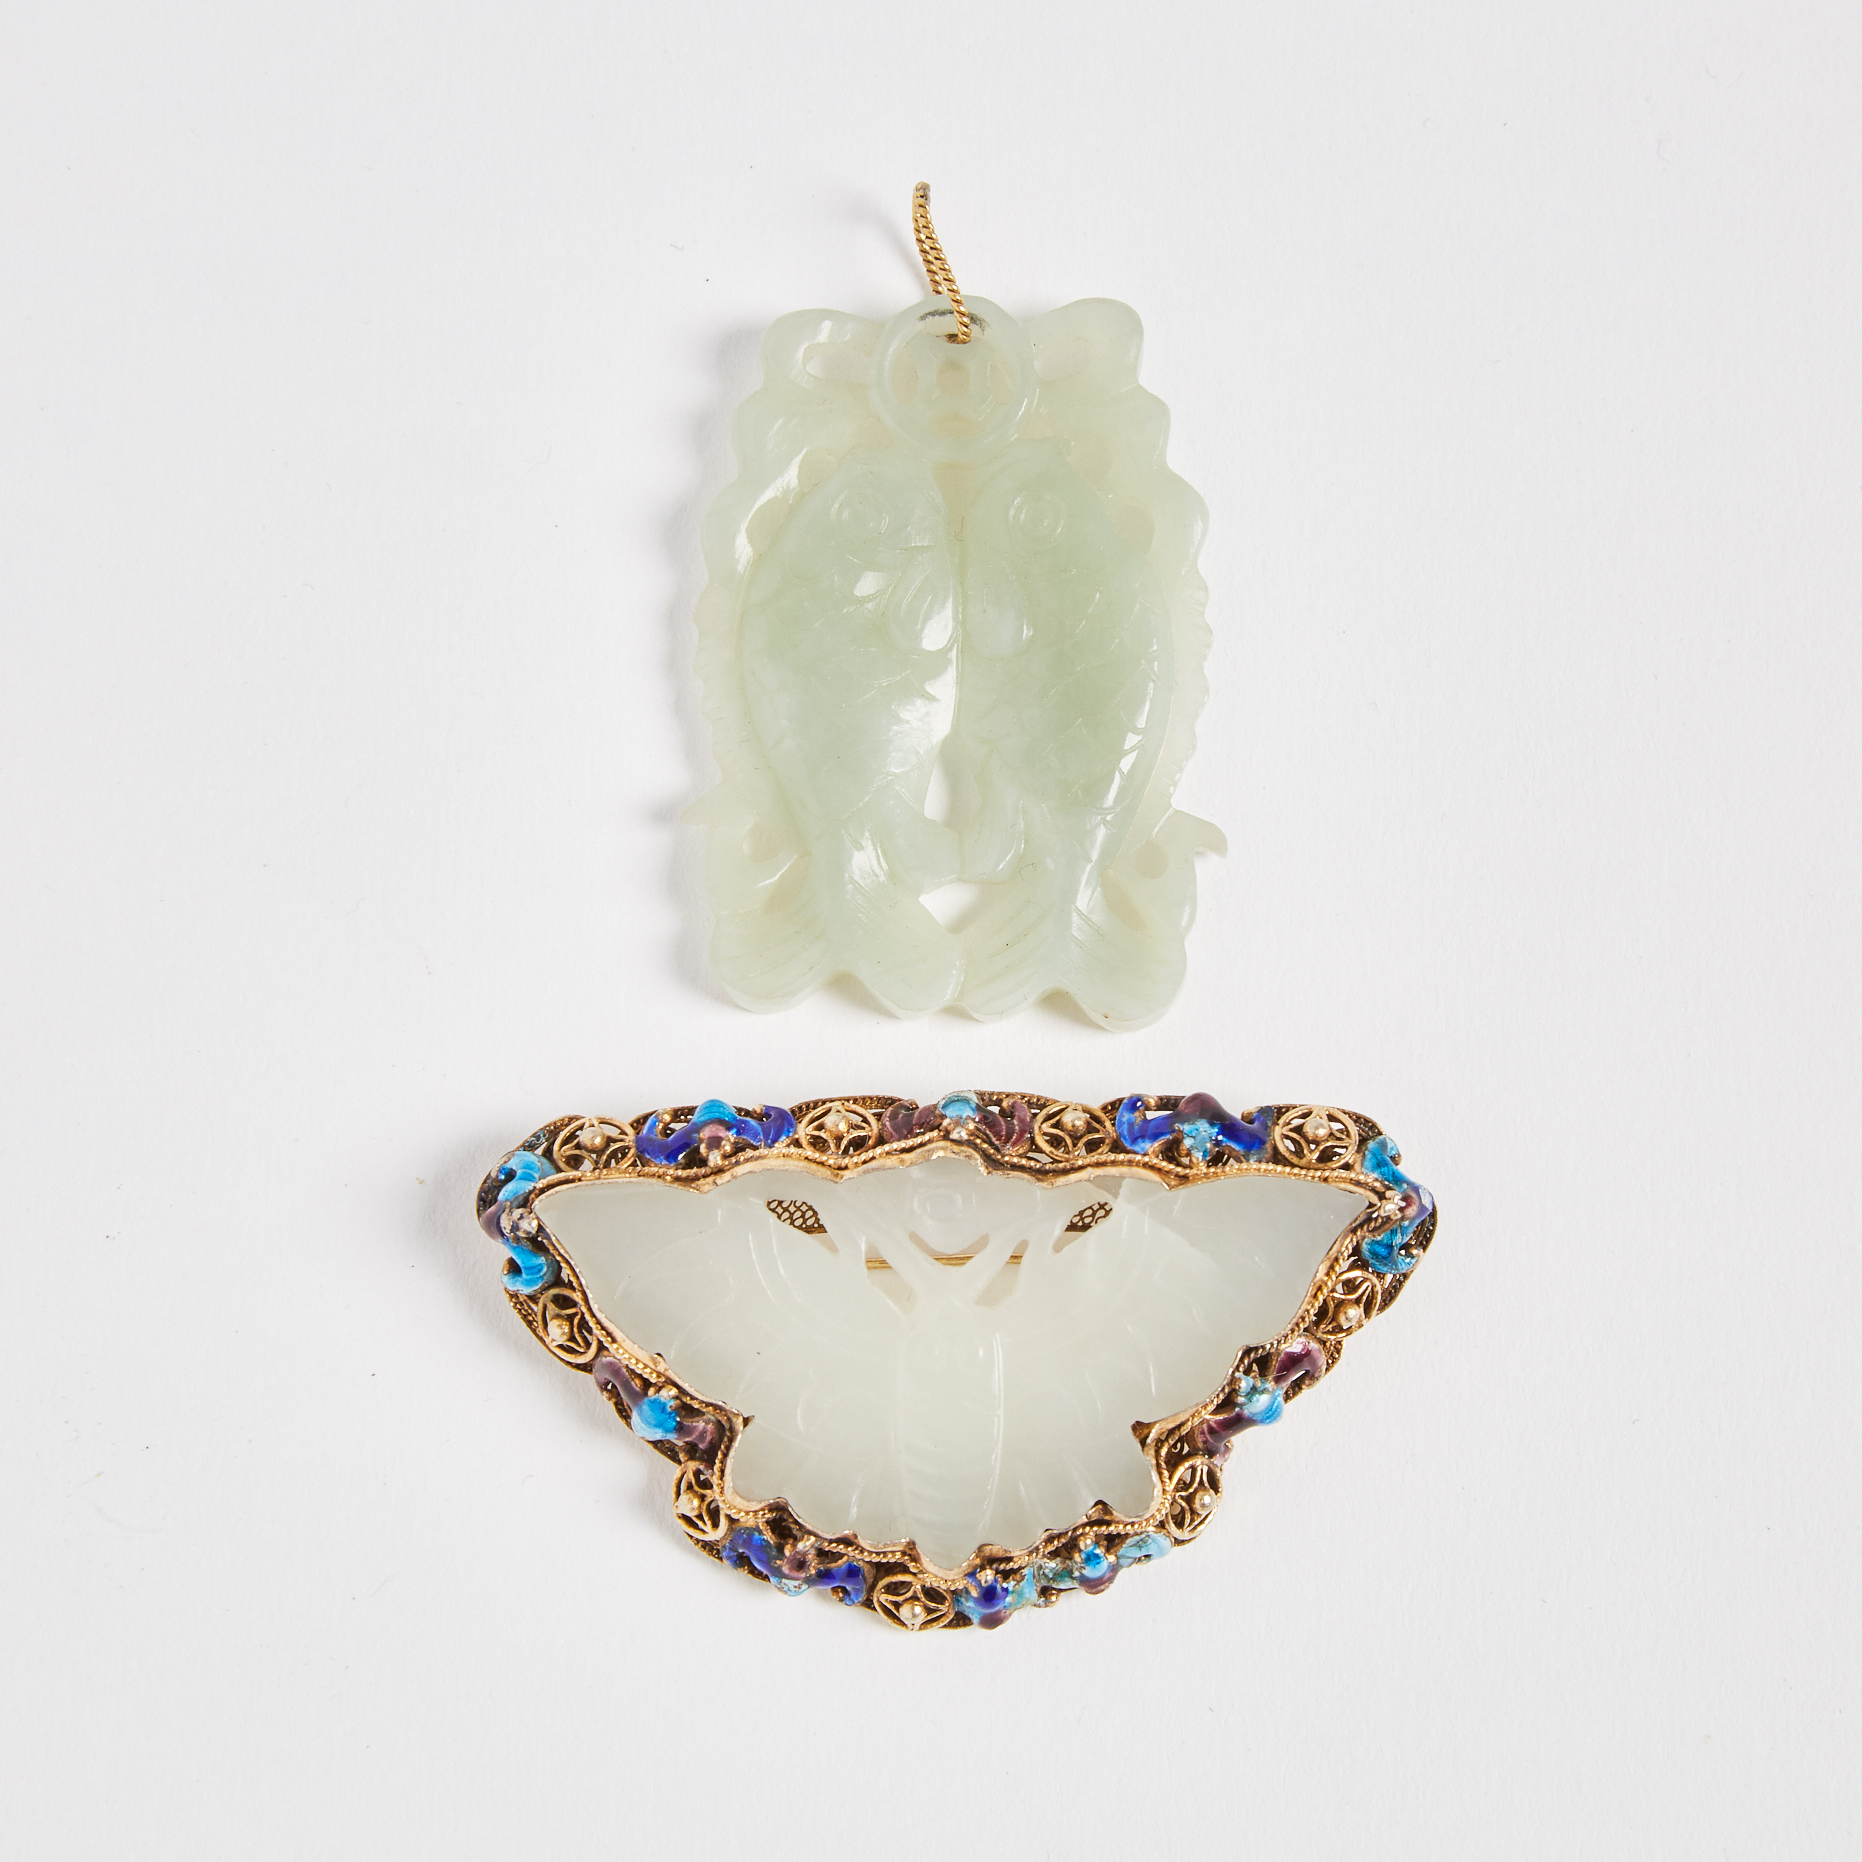 A Jade Carved Butterfly and Bats Pendant